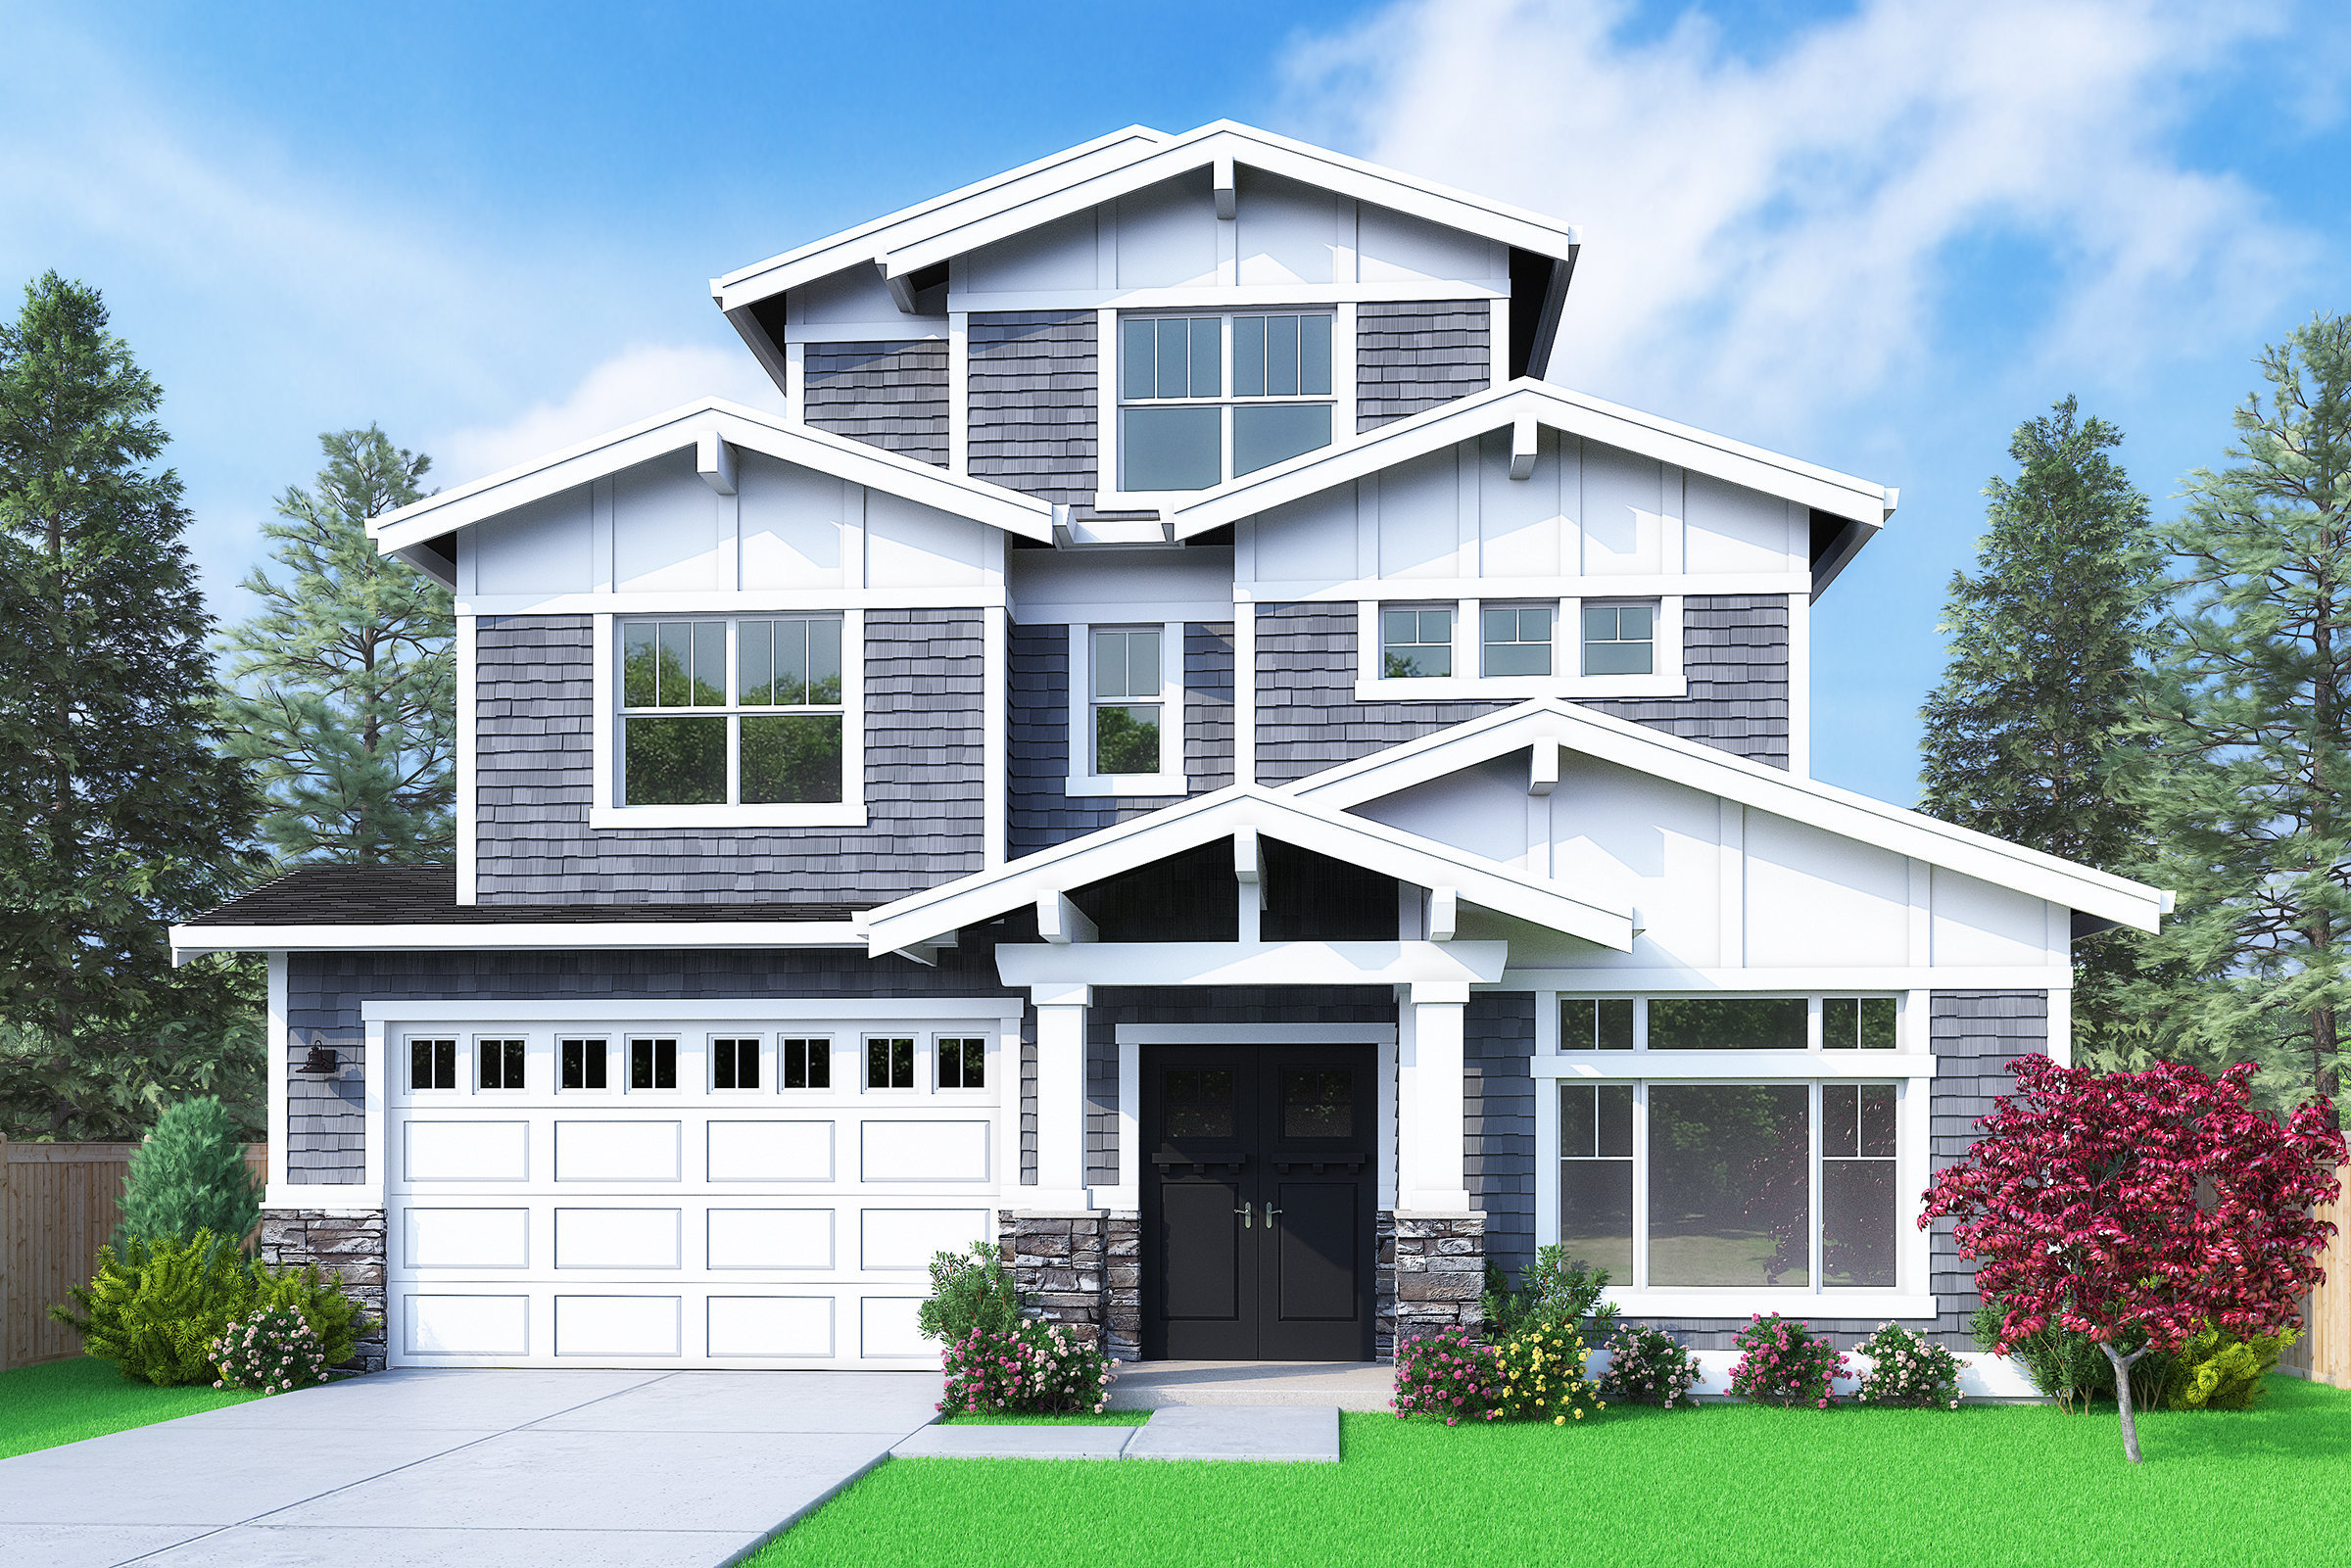 View our new luxury home construction on 9814 NE 26th St, in Bellevue, WA from MN Custom Homes